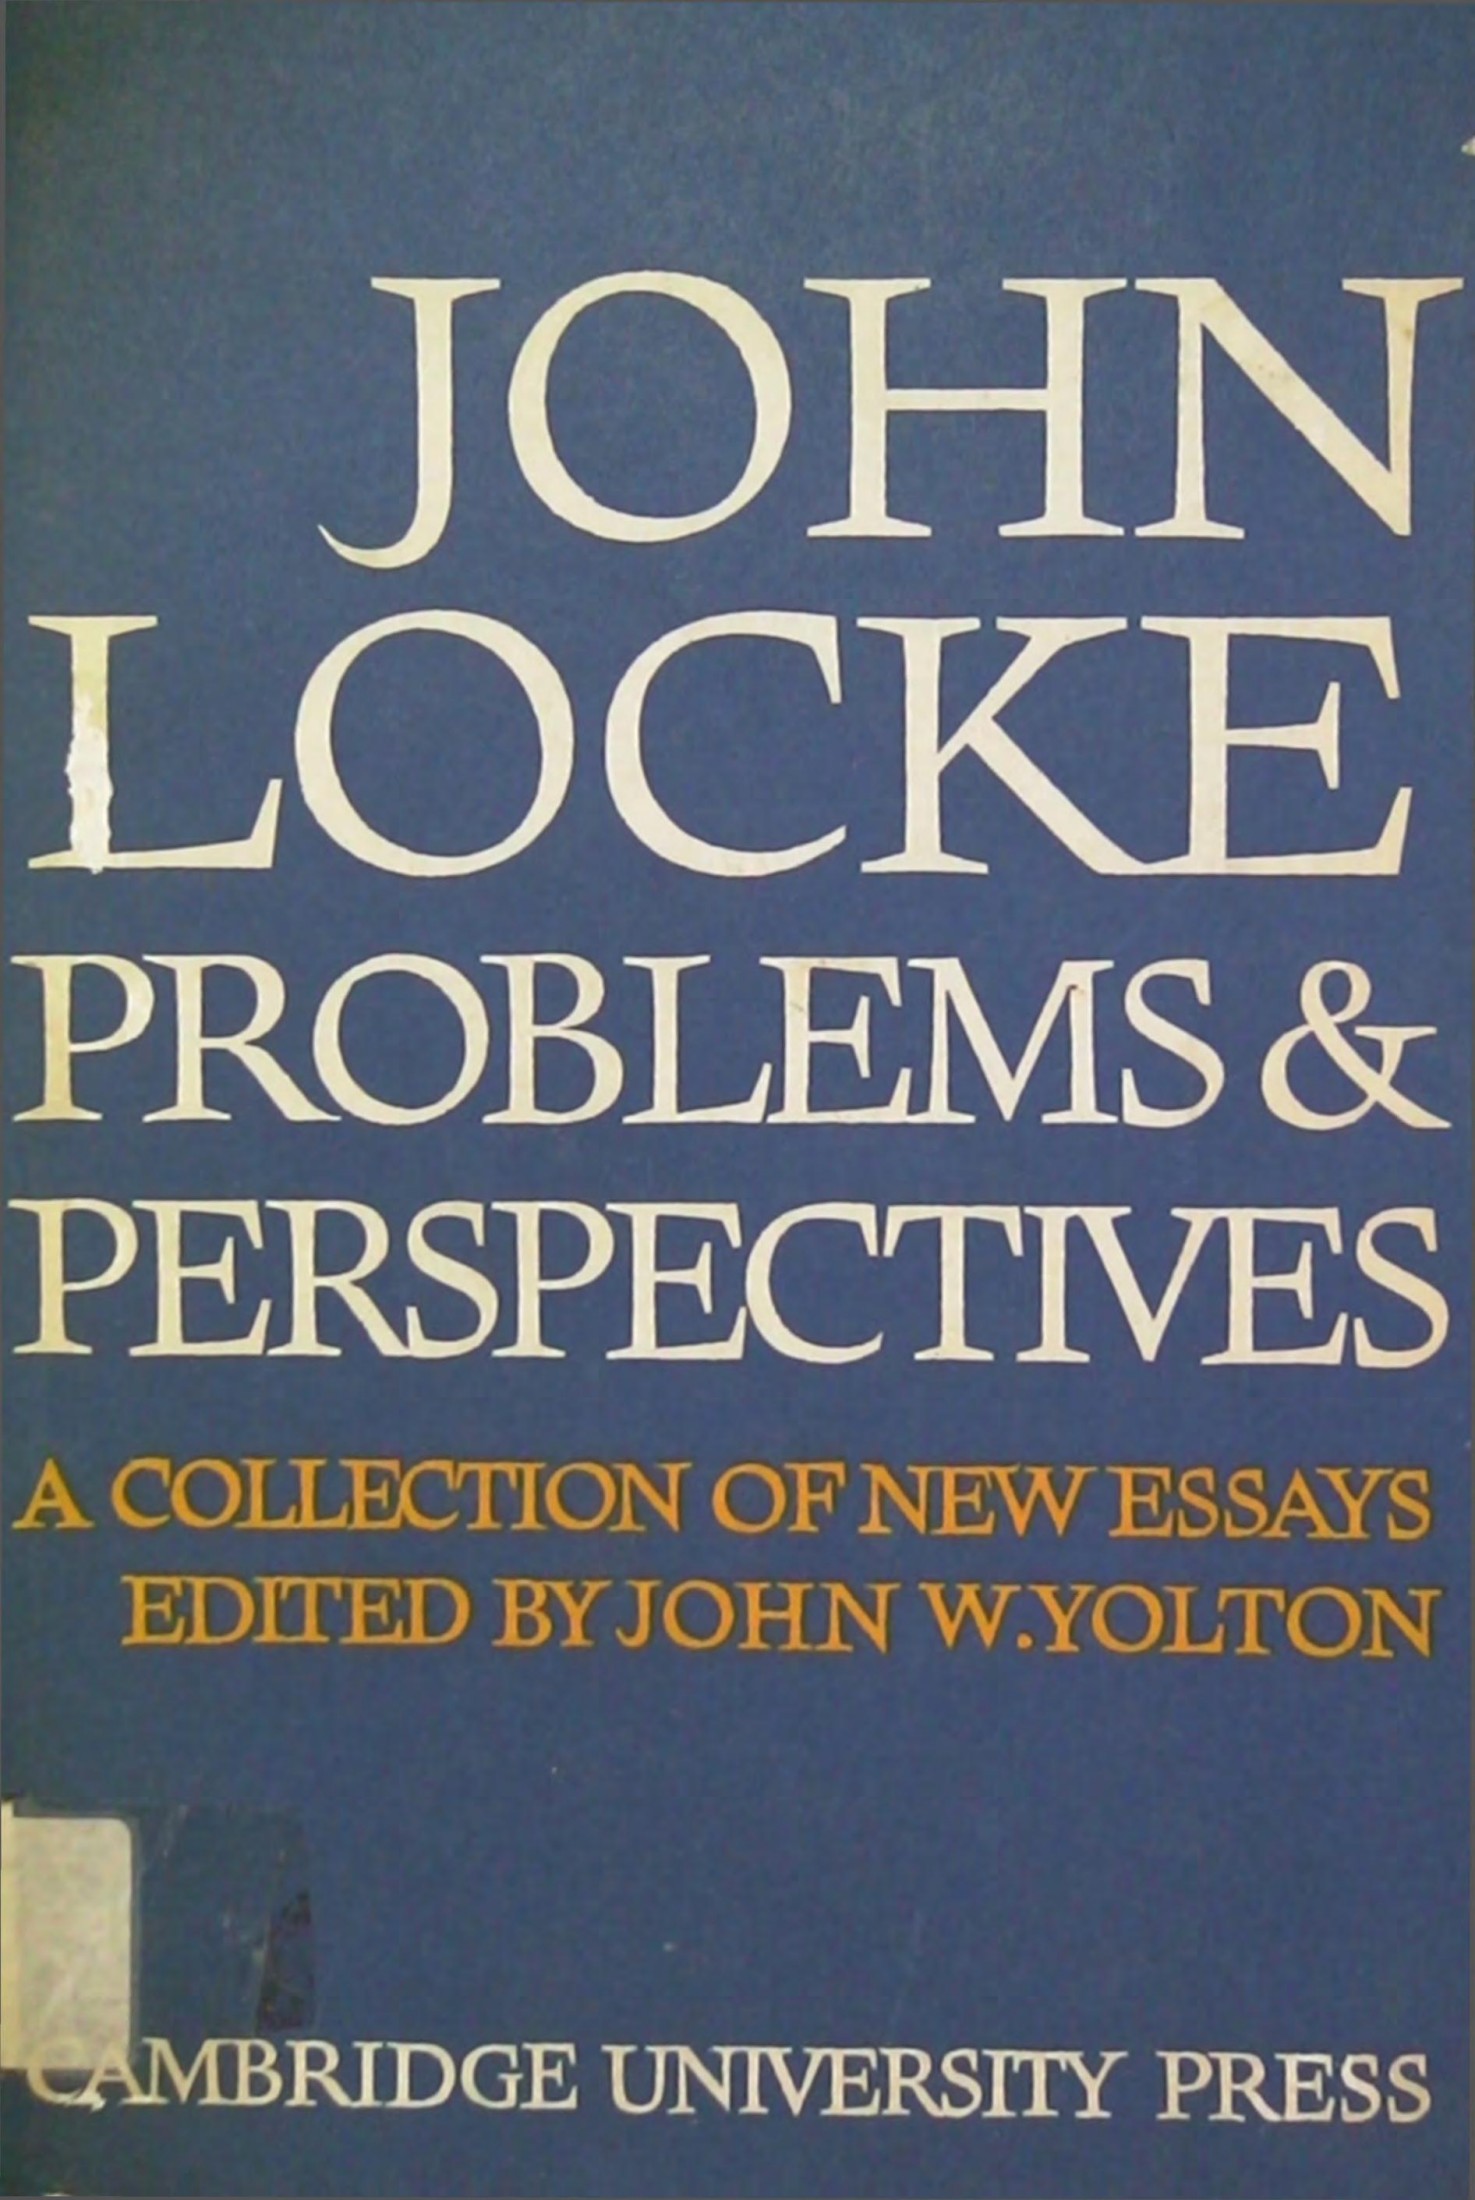 John Locke, Problems and perspectives, A collection of new essays by John W. Yolton (ed.) (z-lib.org)